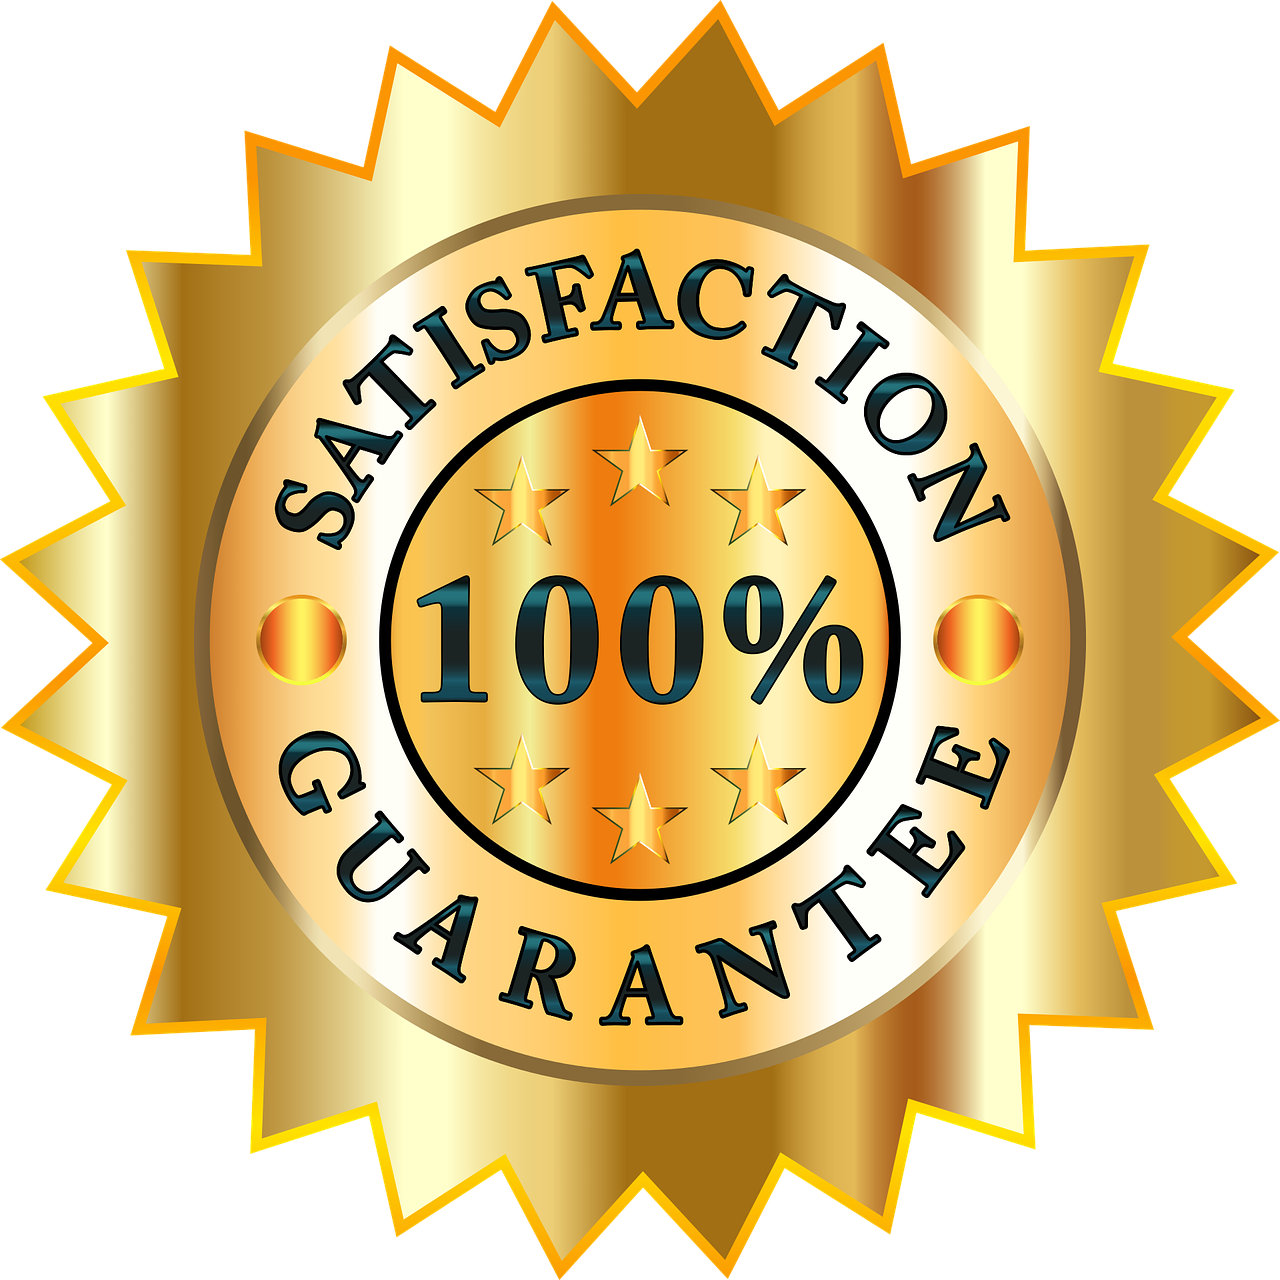 Custom Comfort ClimateCare heating ventilation and air conditioning systems offer a 100% satisfaction guarantee.